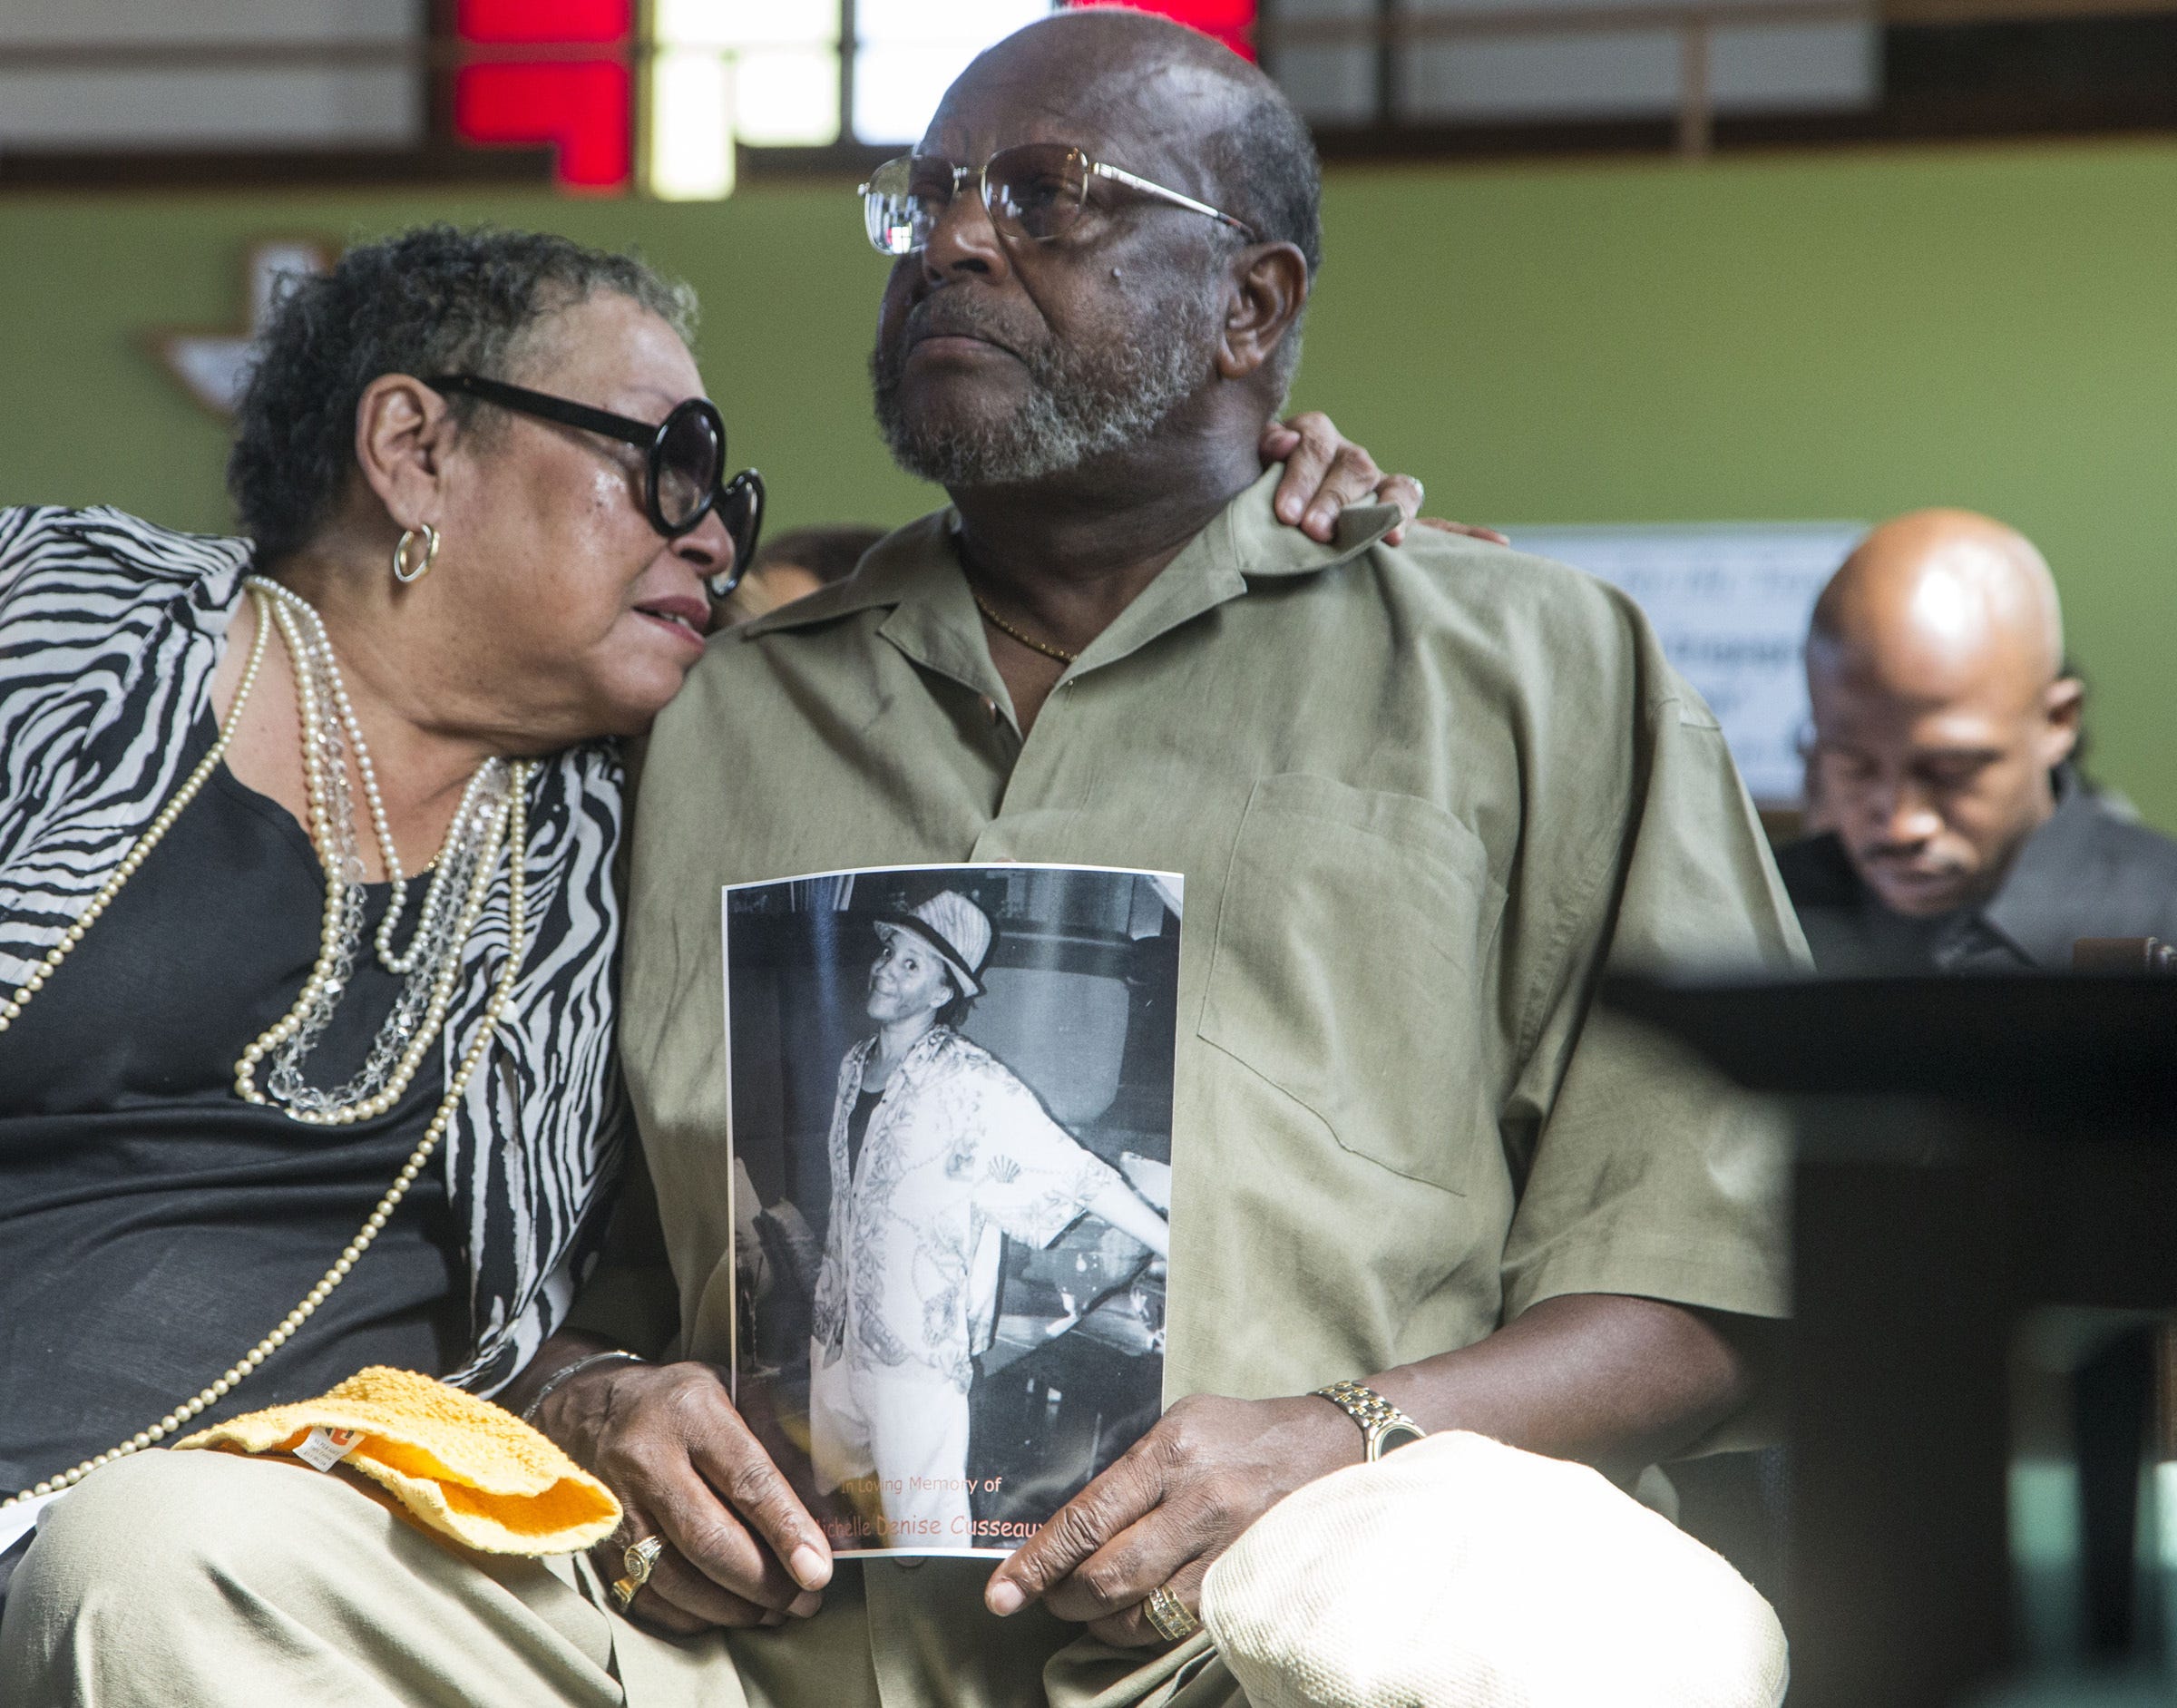 Toni Linyard and Freddie Bell, aunt and uncle of deceased Michelle Cusseaux, gathered for funeral services at Emmanuel Church Of God In Christ in Phoenix, Ariz., on Aug. 23, 2014. Cusseaux, a mentally ill Phoenix woman, was slain by Phoenix police.